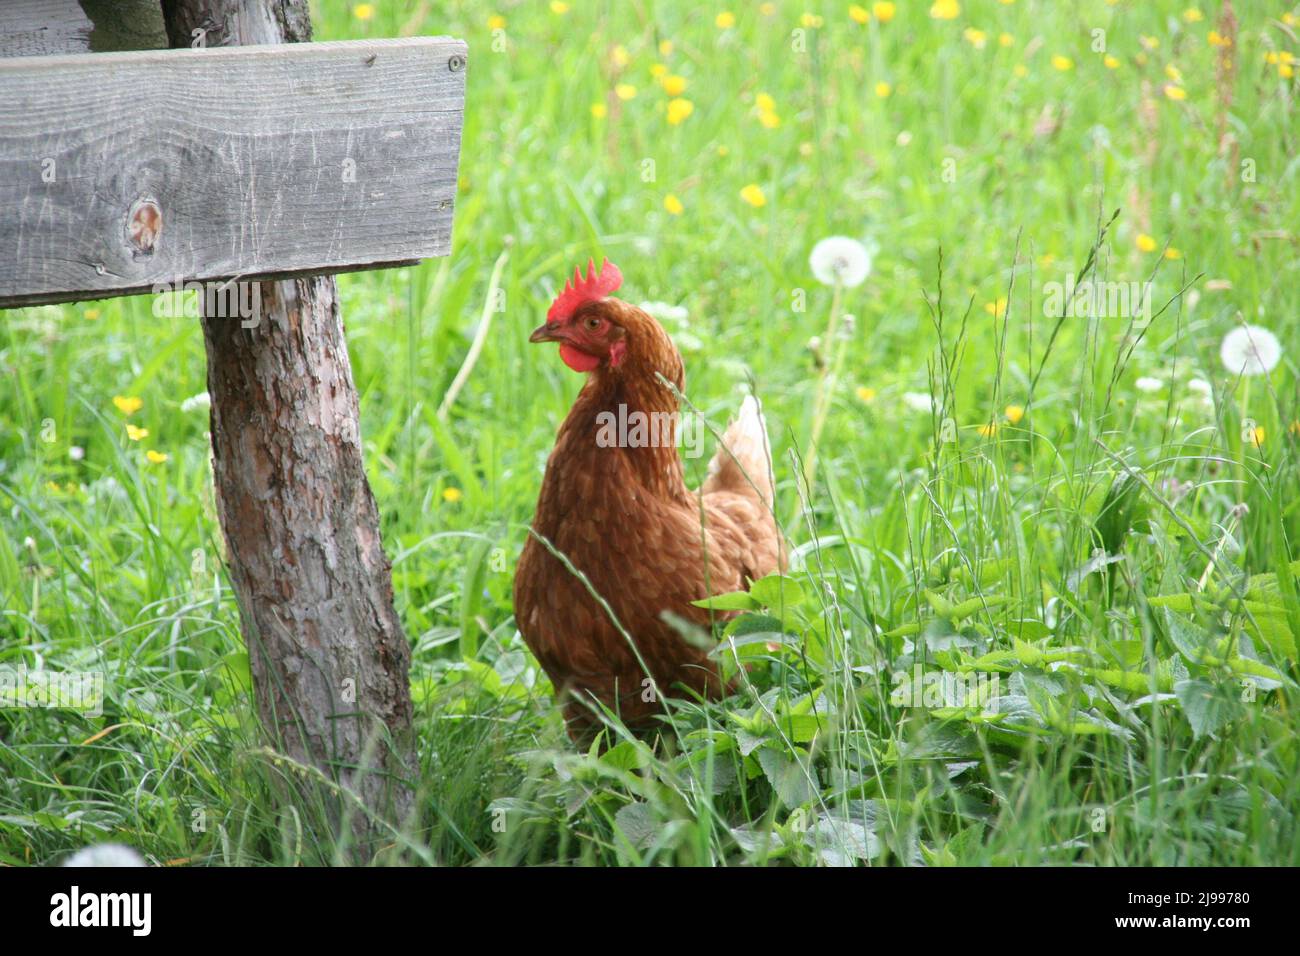 Beautiful small brown hen standing in an open field. Stock Photo